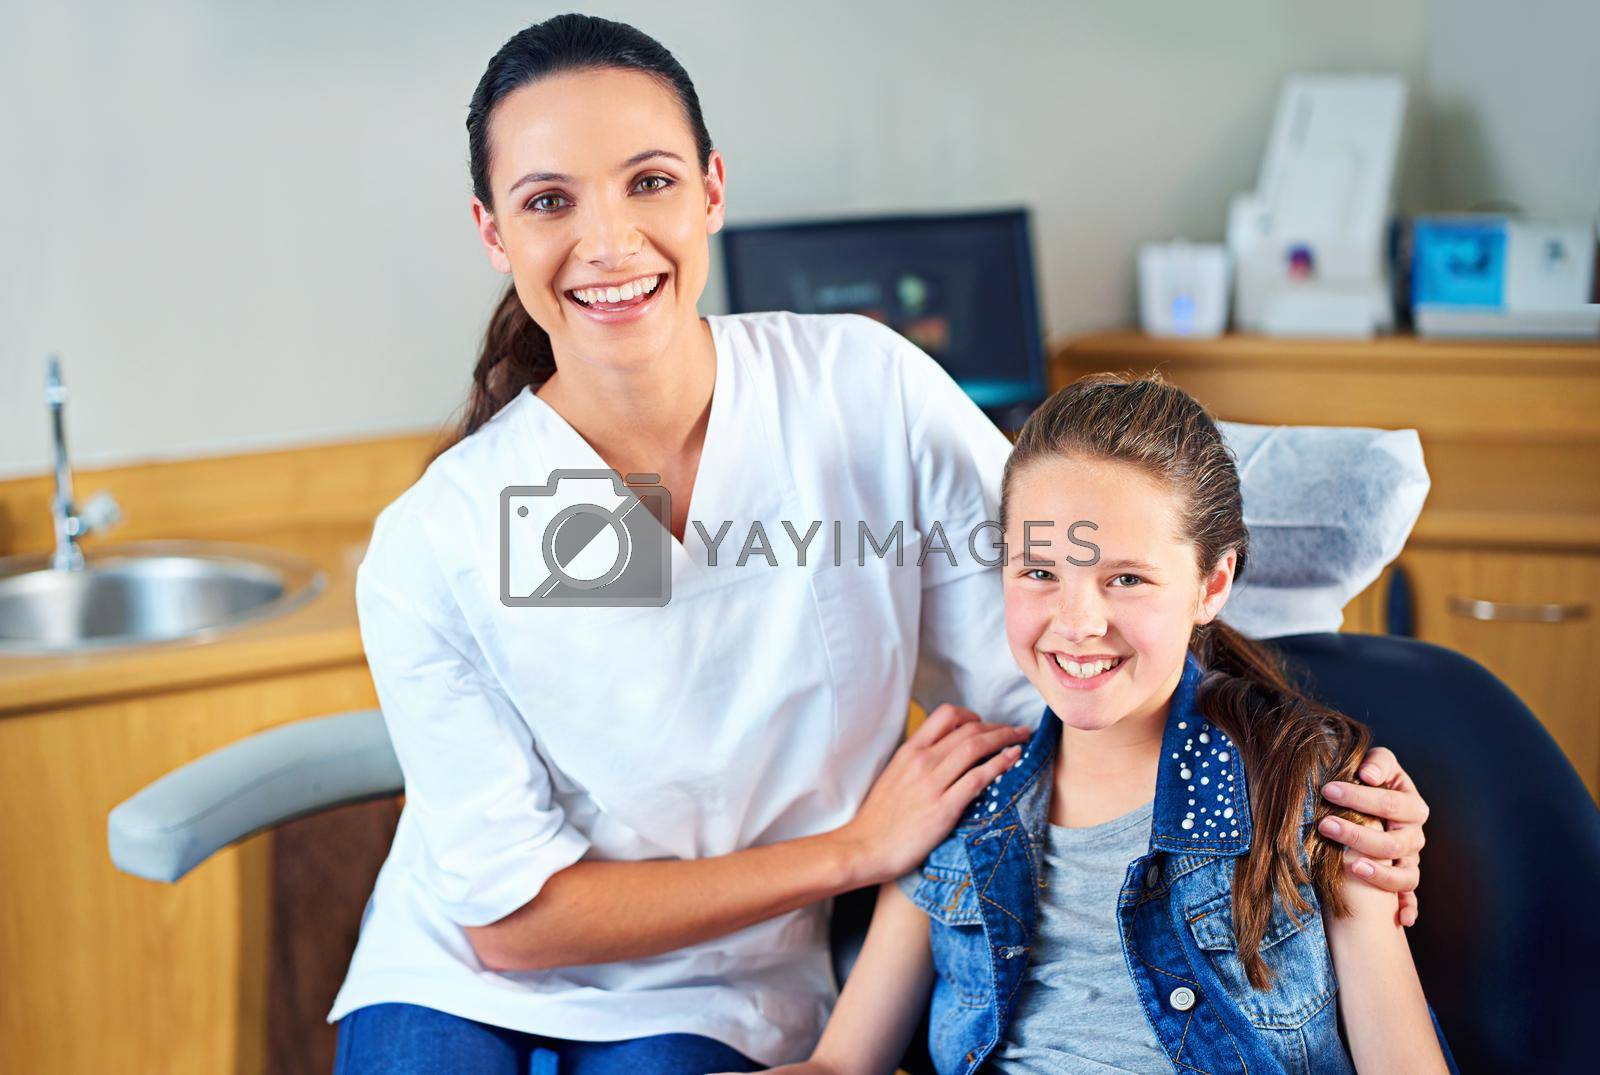 Perfect checkup. a female dentist and child in a dentist office